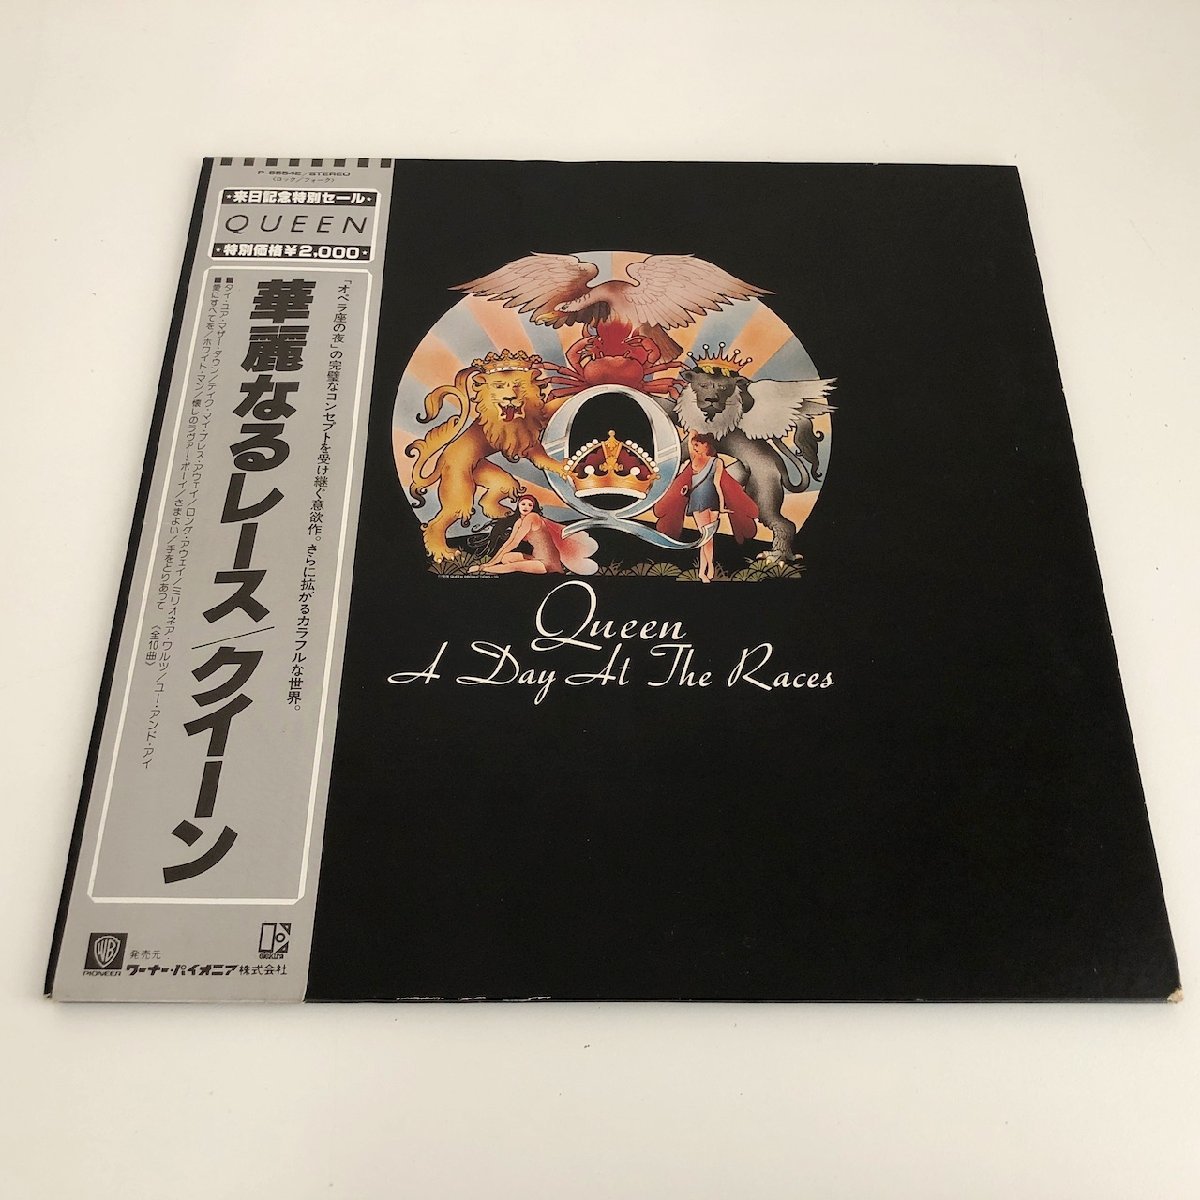 LP/ QUEEN / A DAY AT THE RACES / 国内盤 帯・ライナー ELECTRA P-6554E 403011_画像1